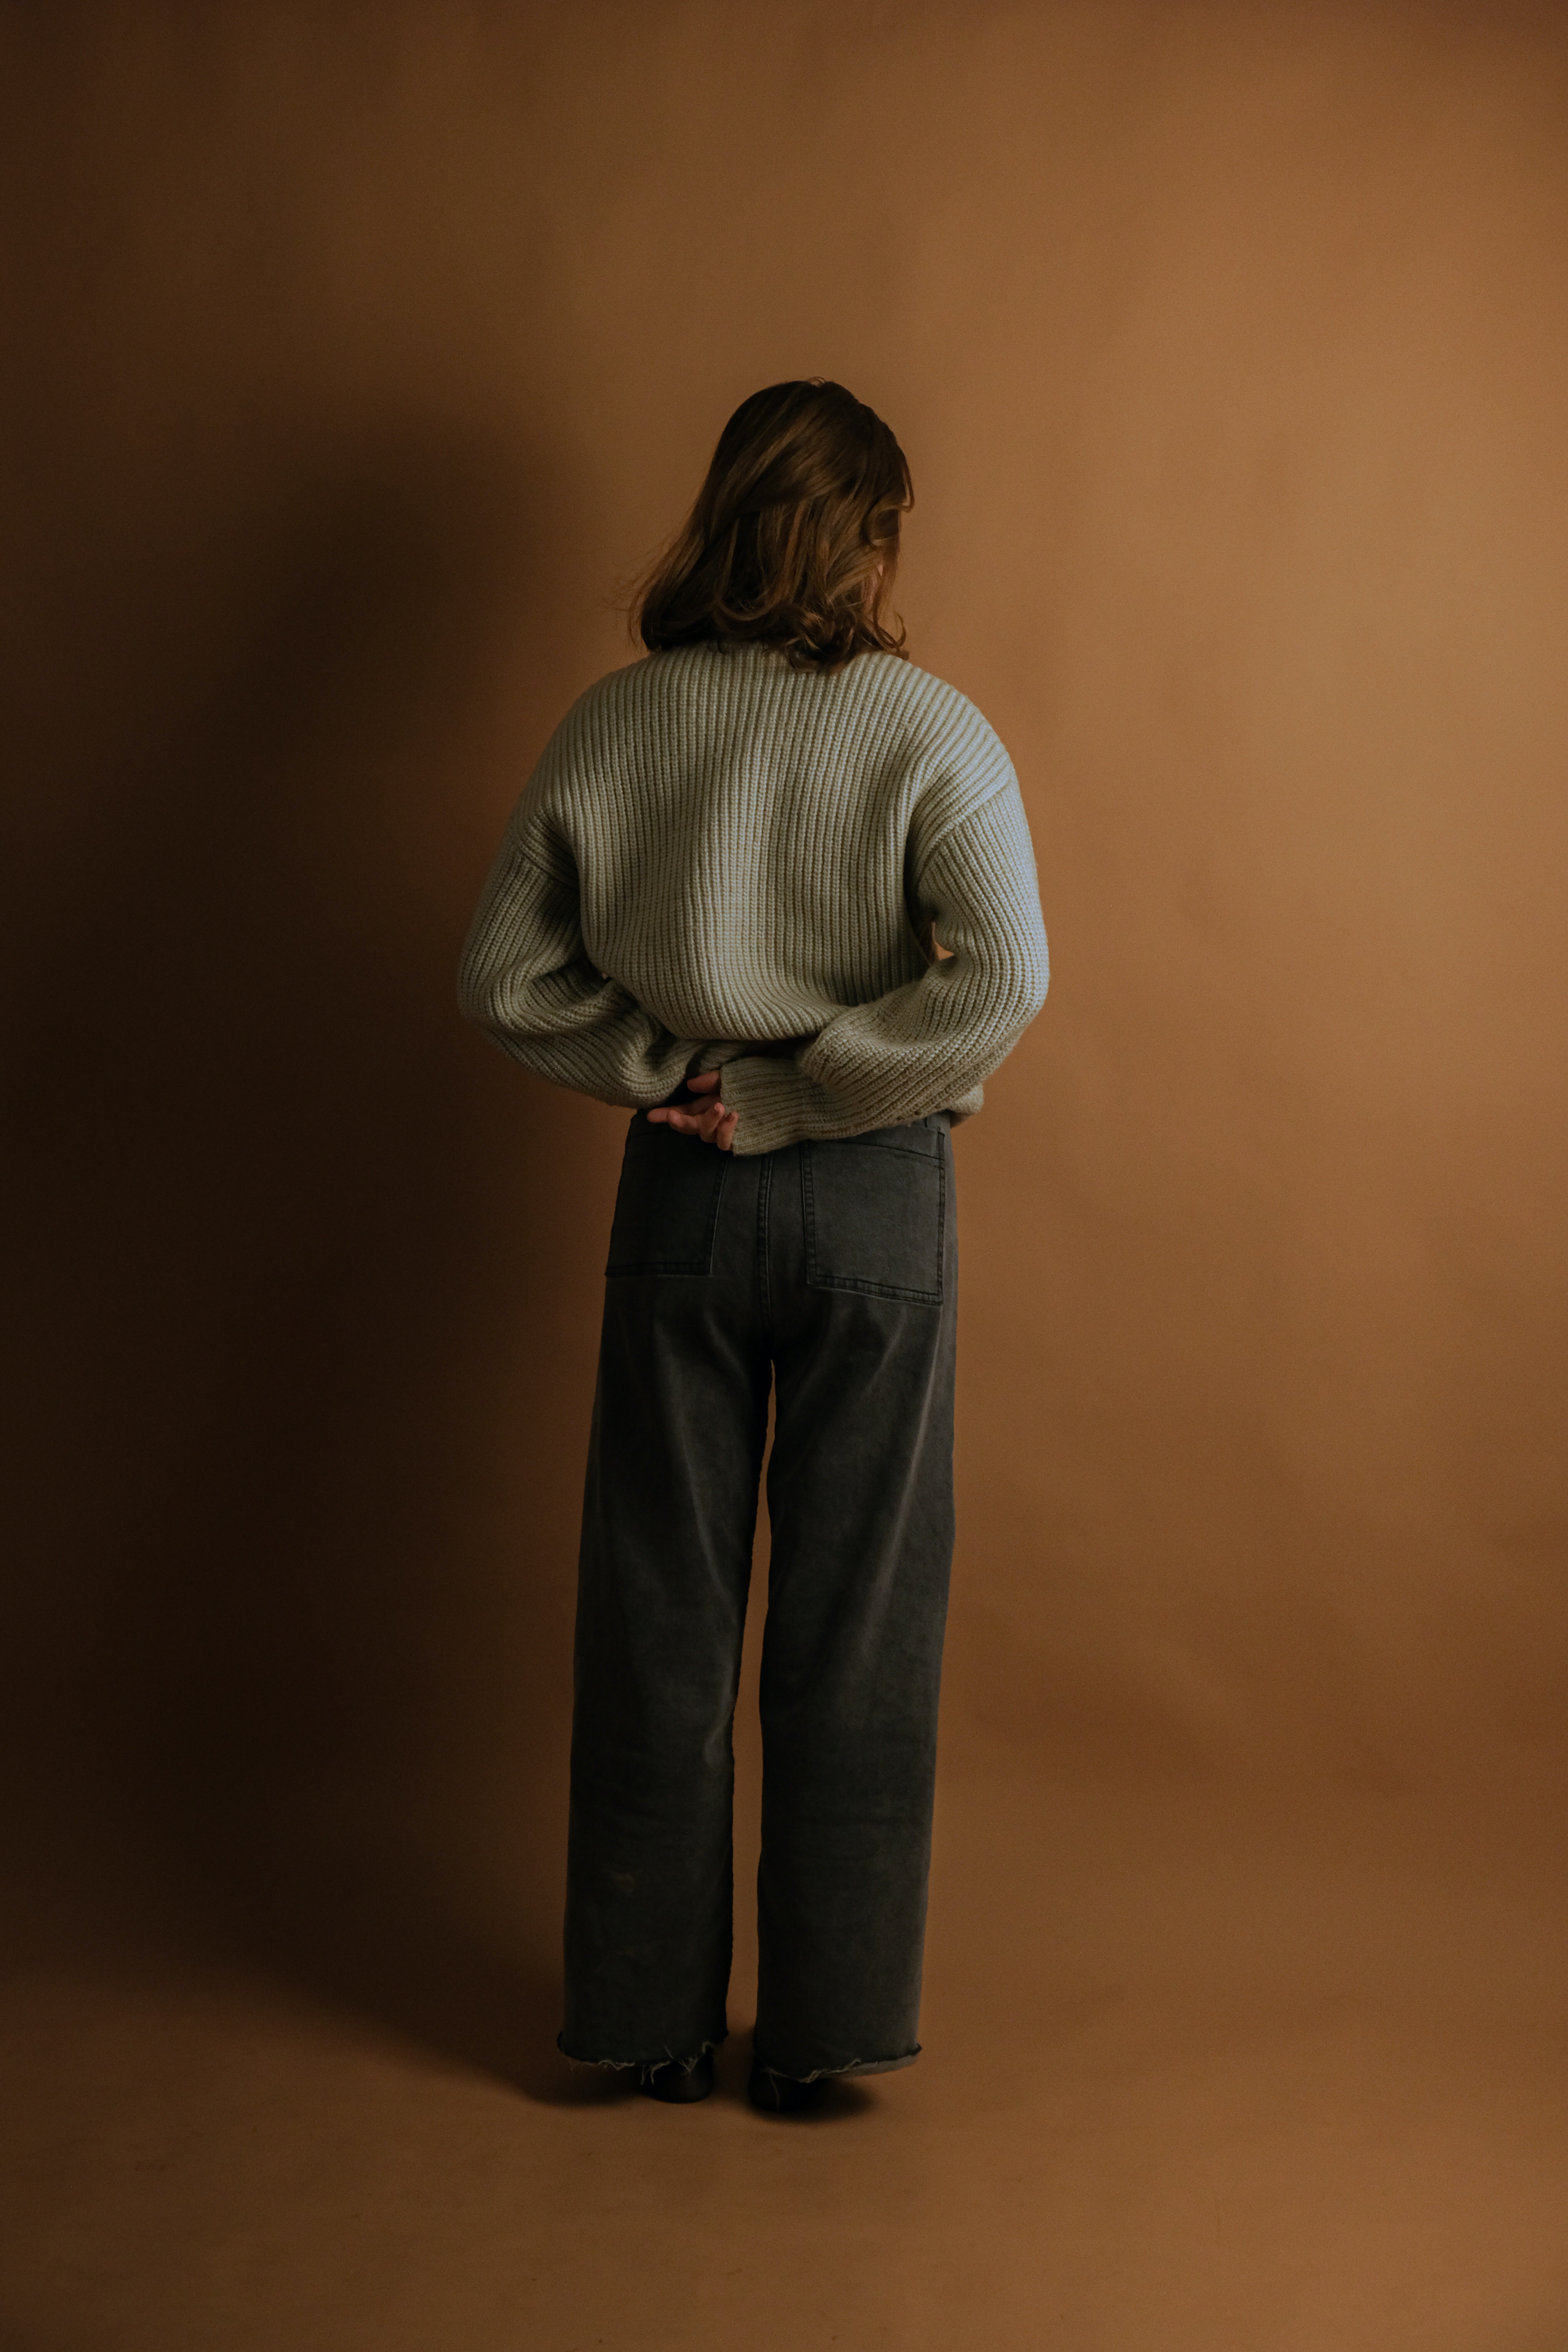 Back View of Woman in Baggy Clothes · Free